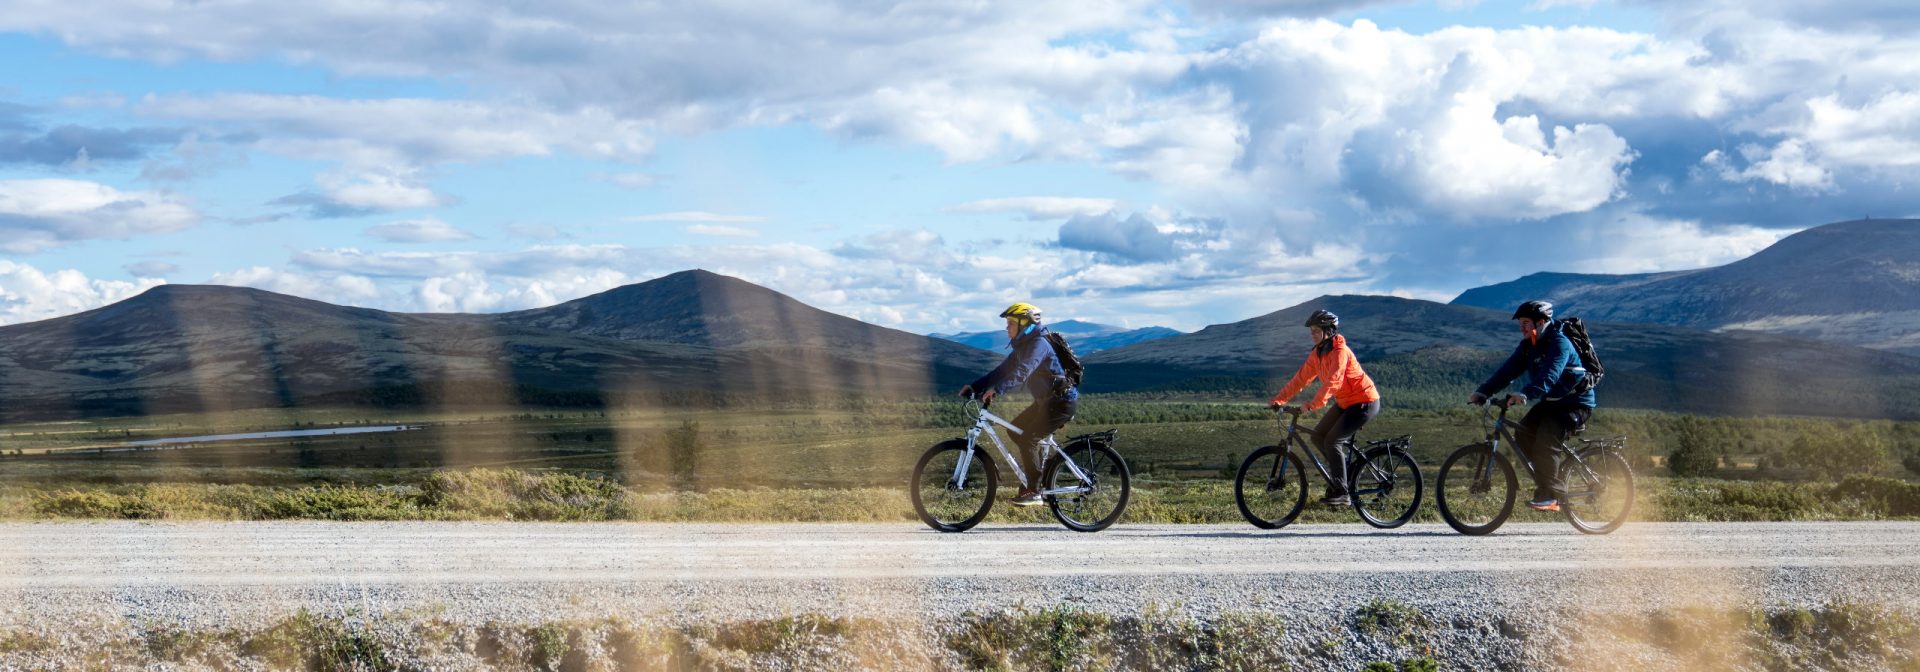 tour-de-dovre-national-park-bicycle-package-norway-by-bike